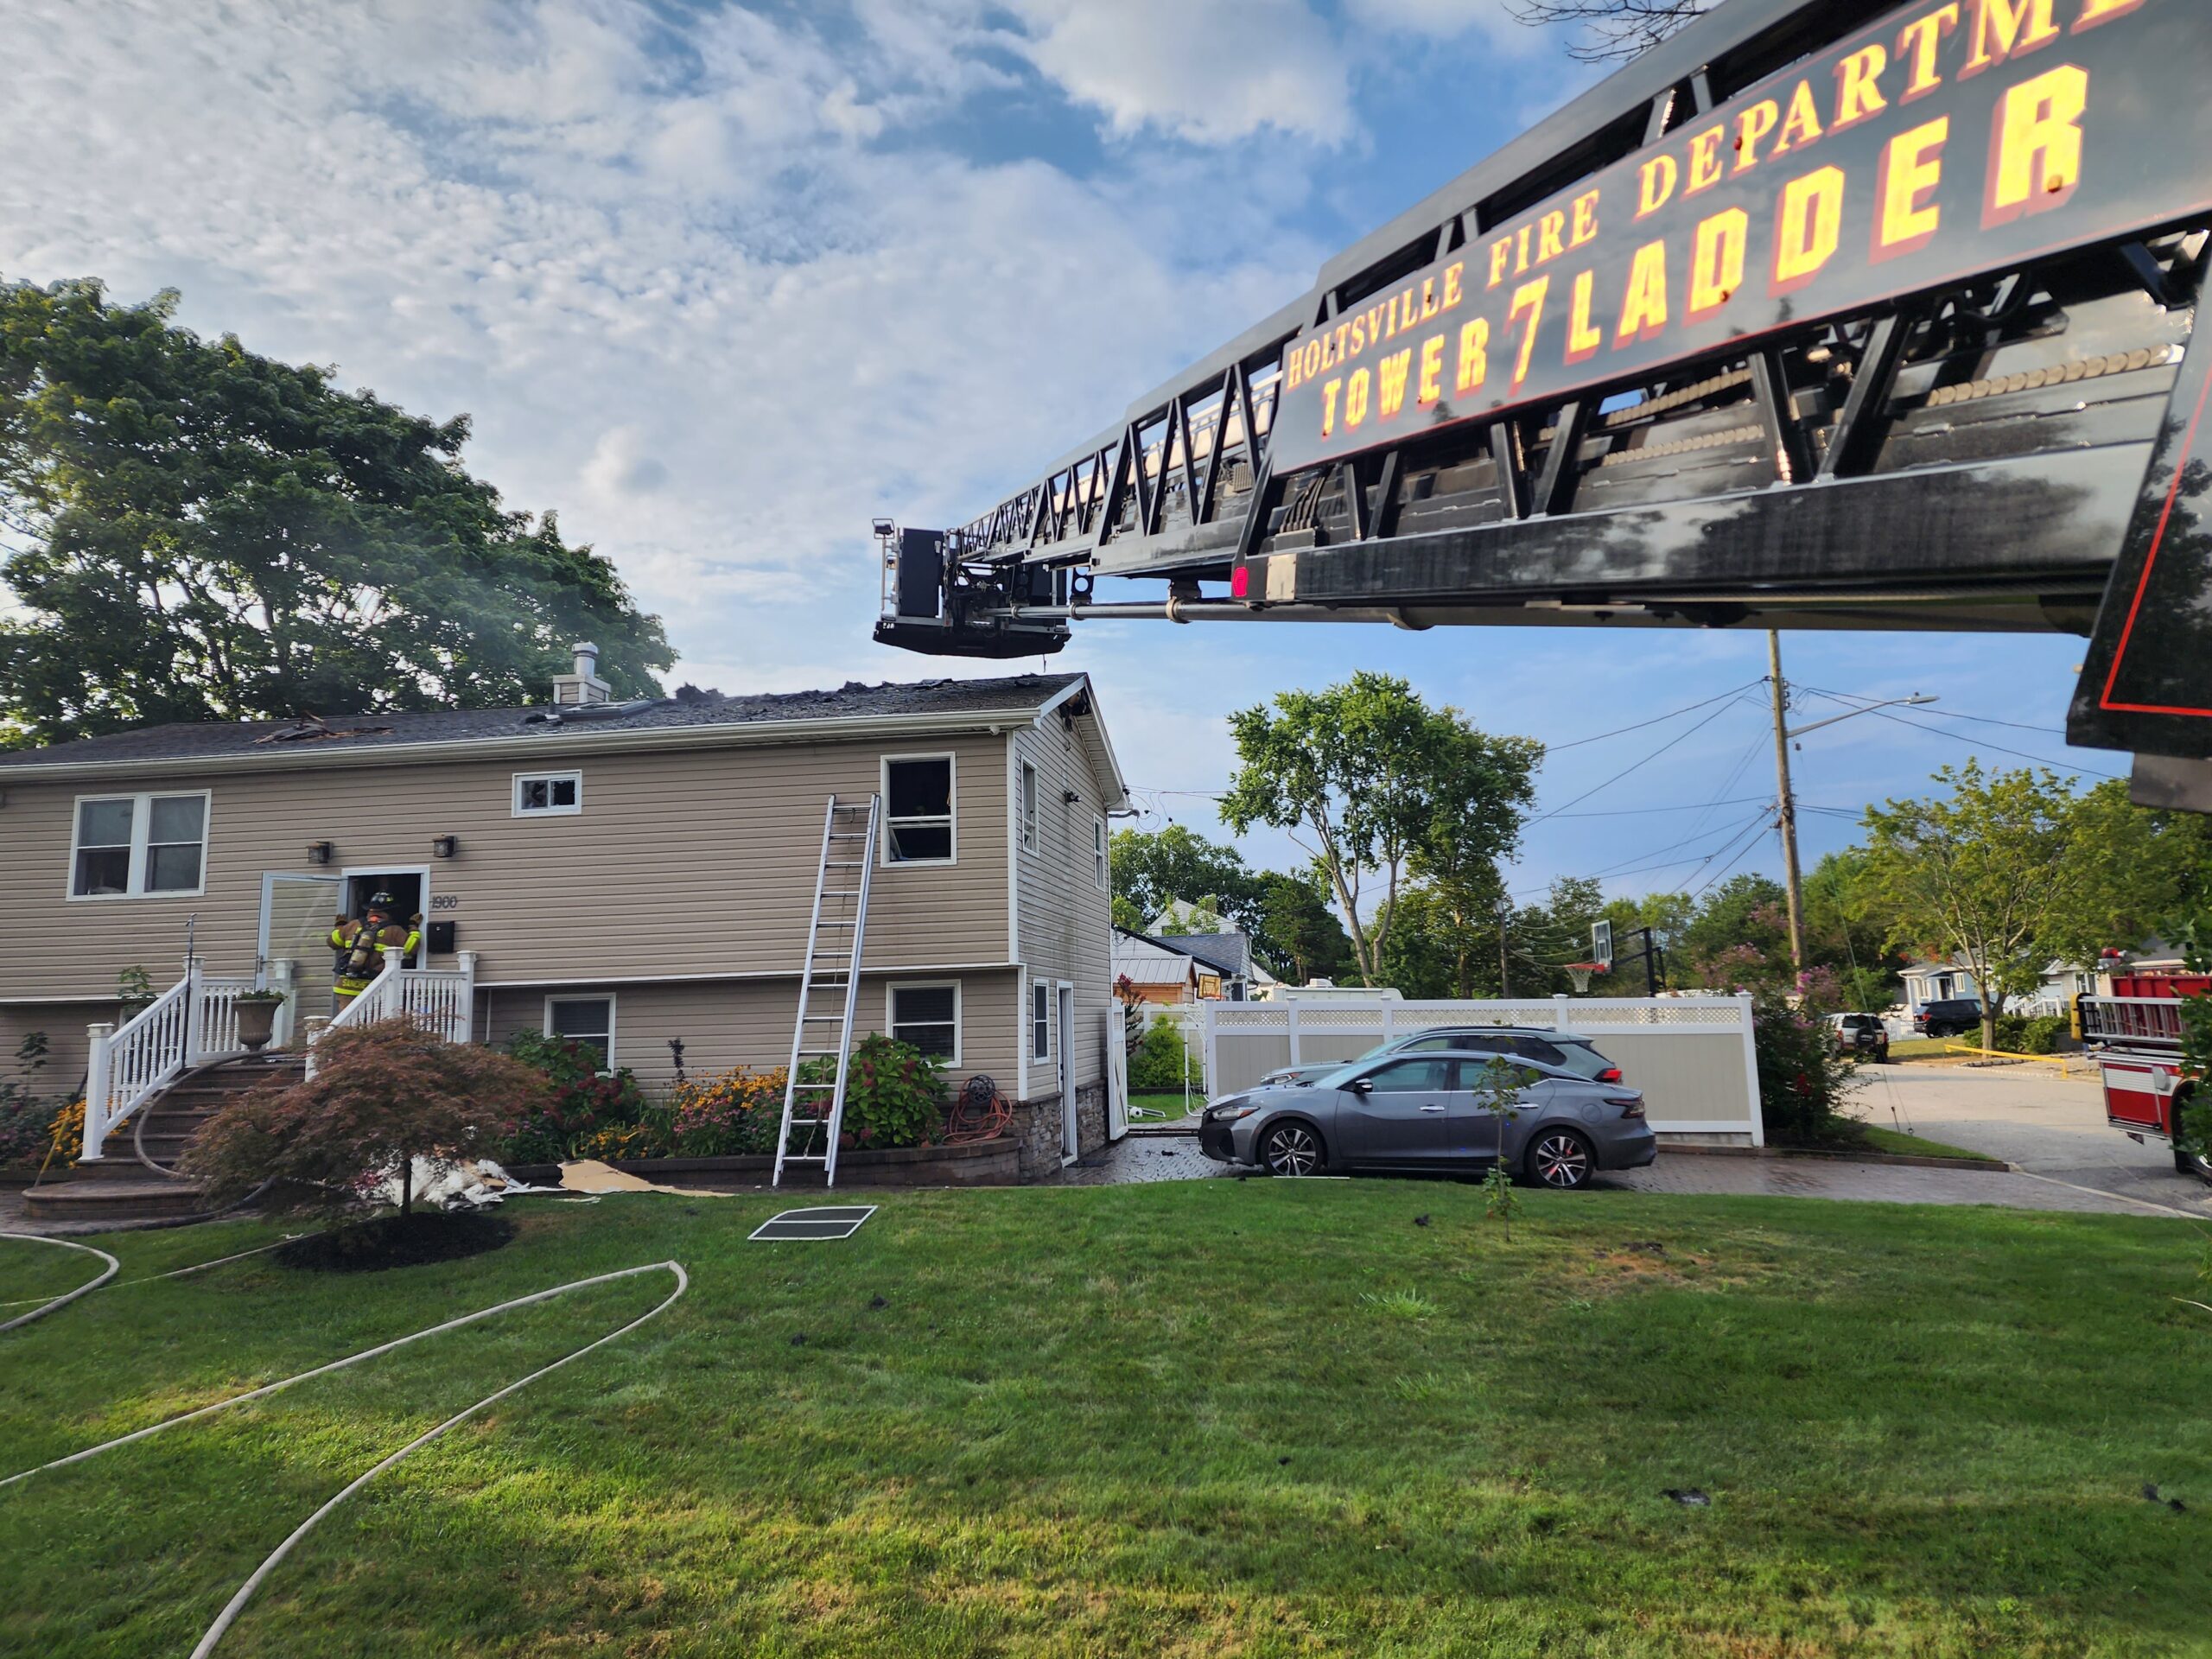 Holtsville FD Responds to Medford Fire District